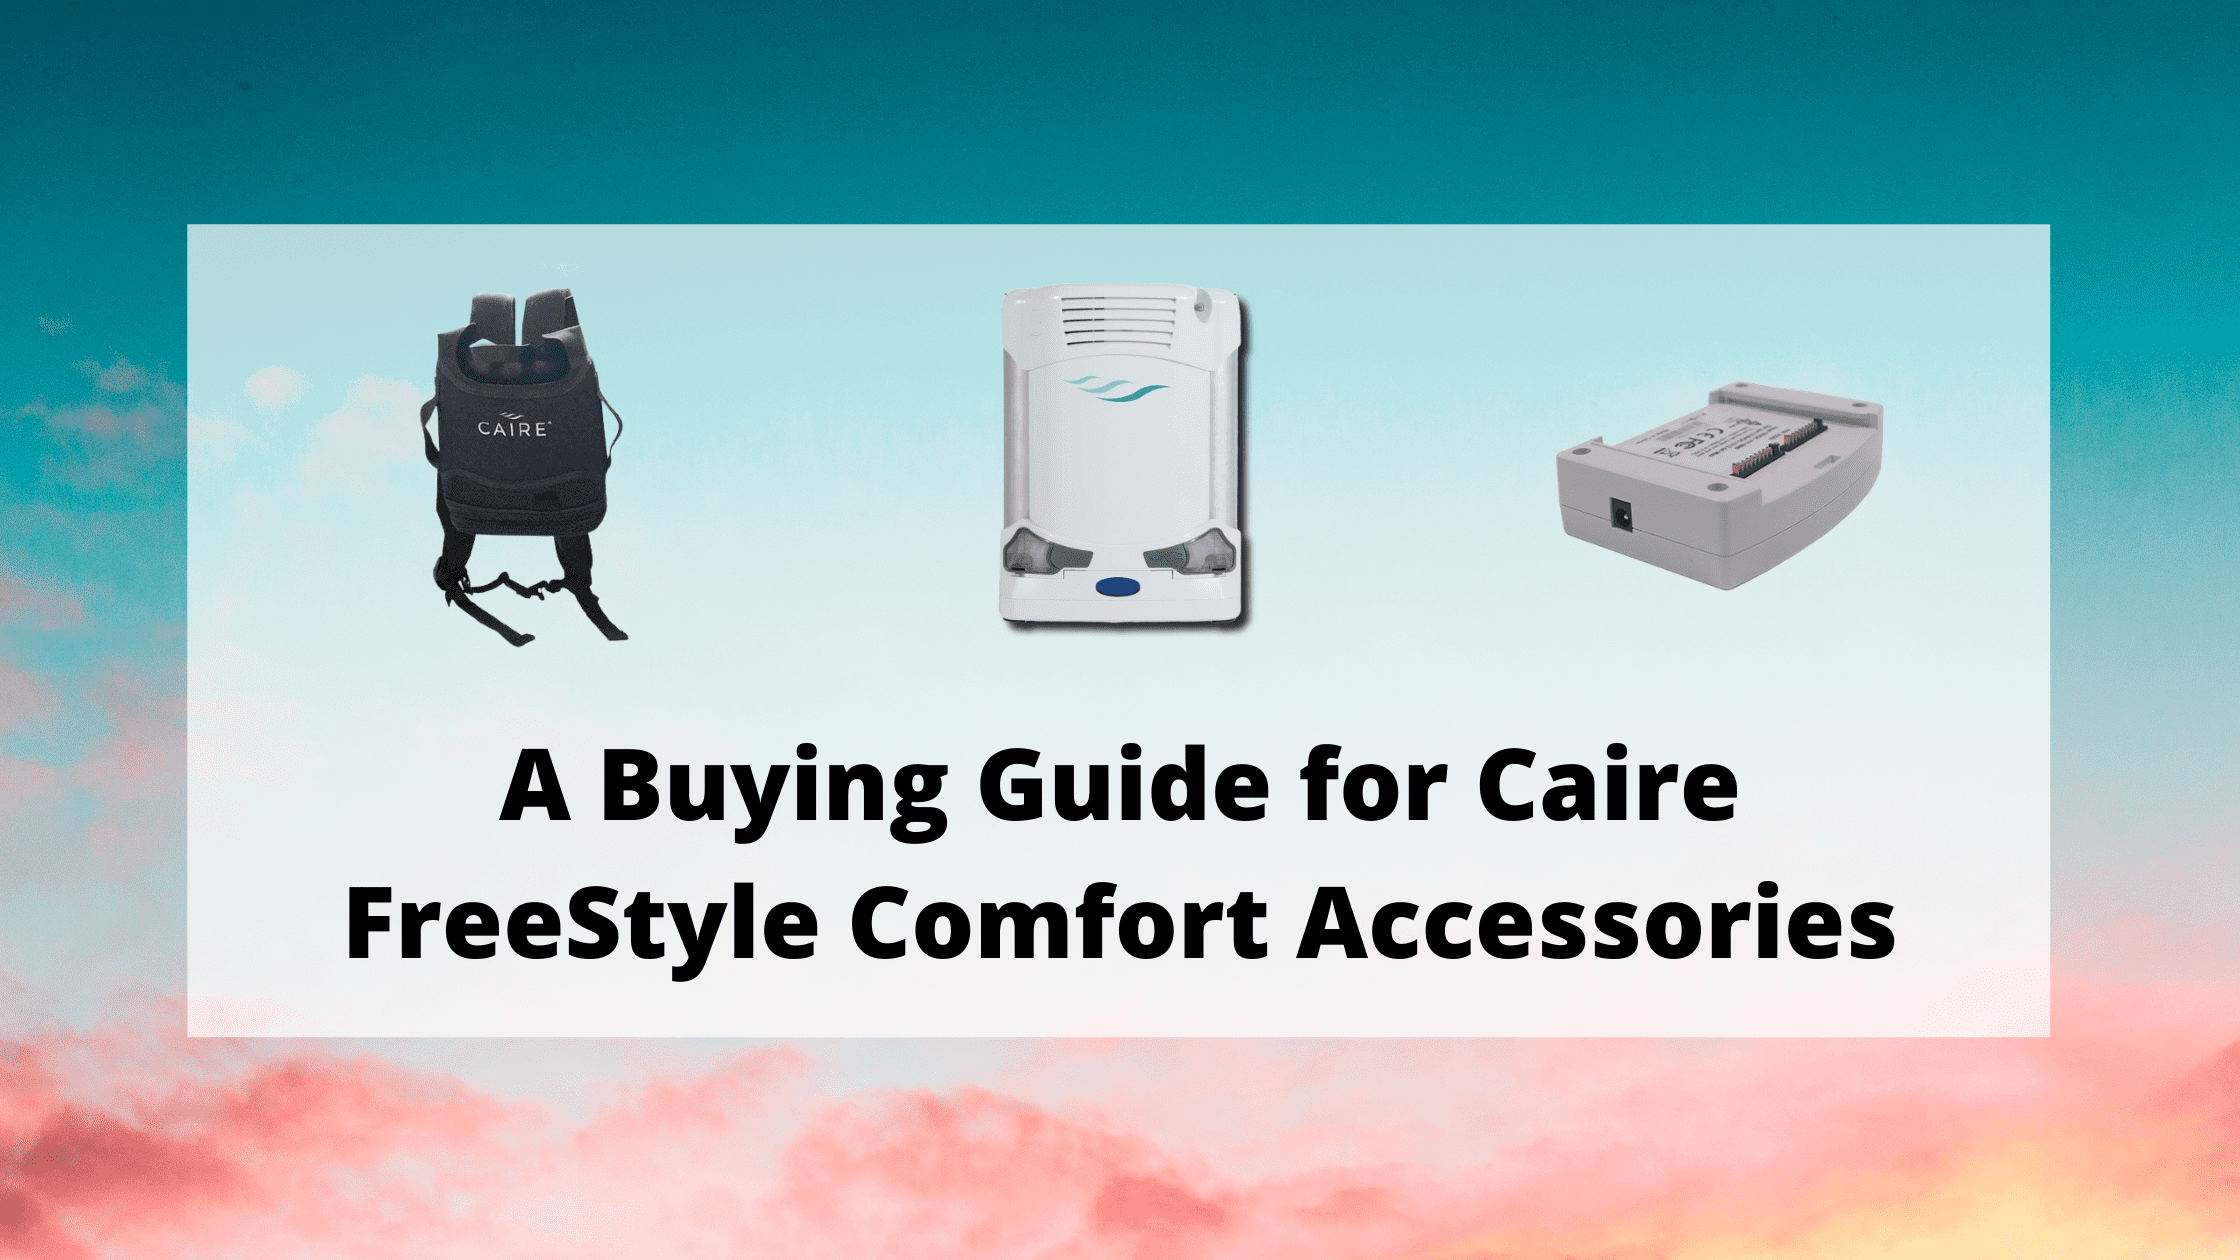 A Buying Guide for Caire FreeStyle Comfort Accessories